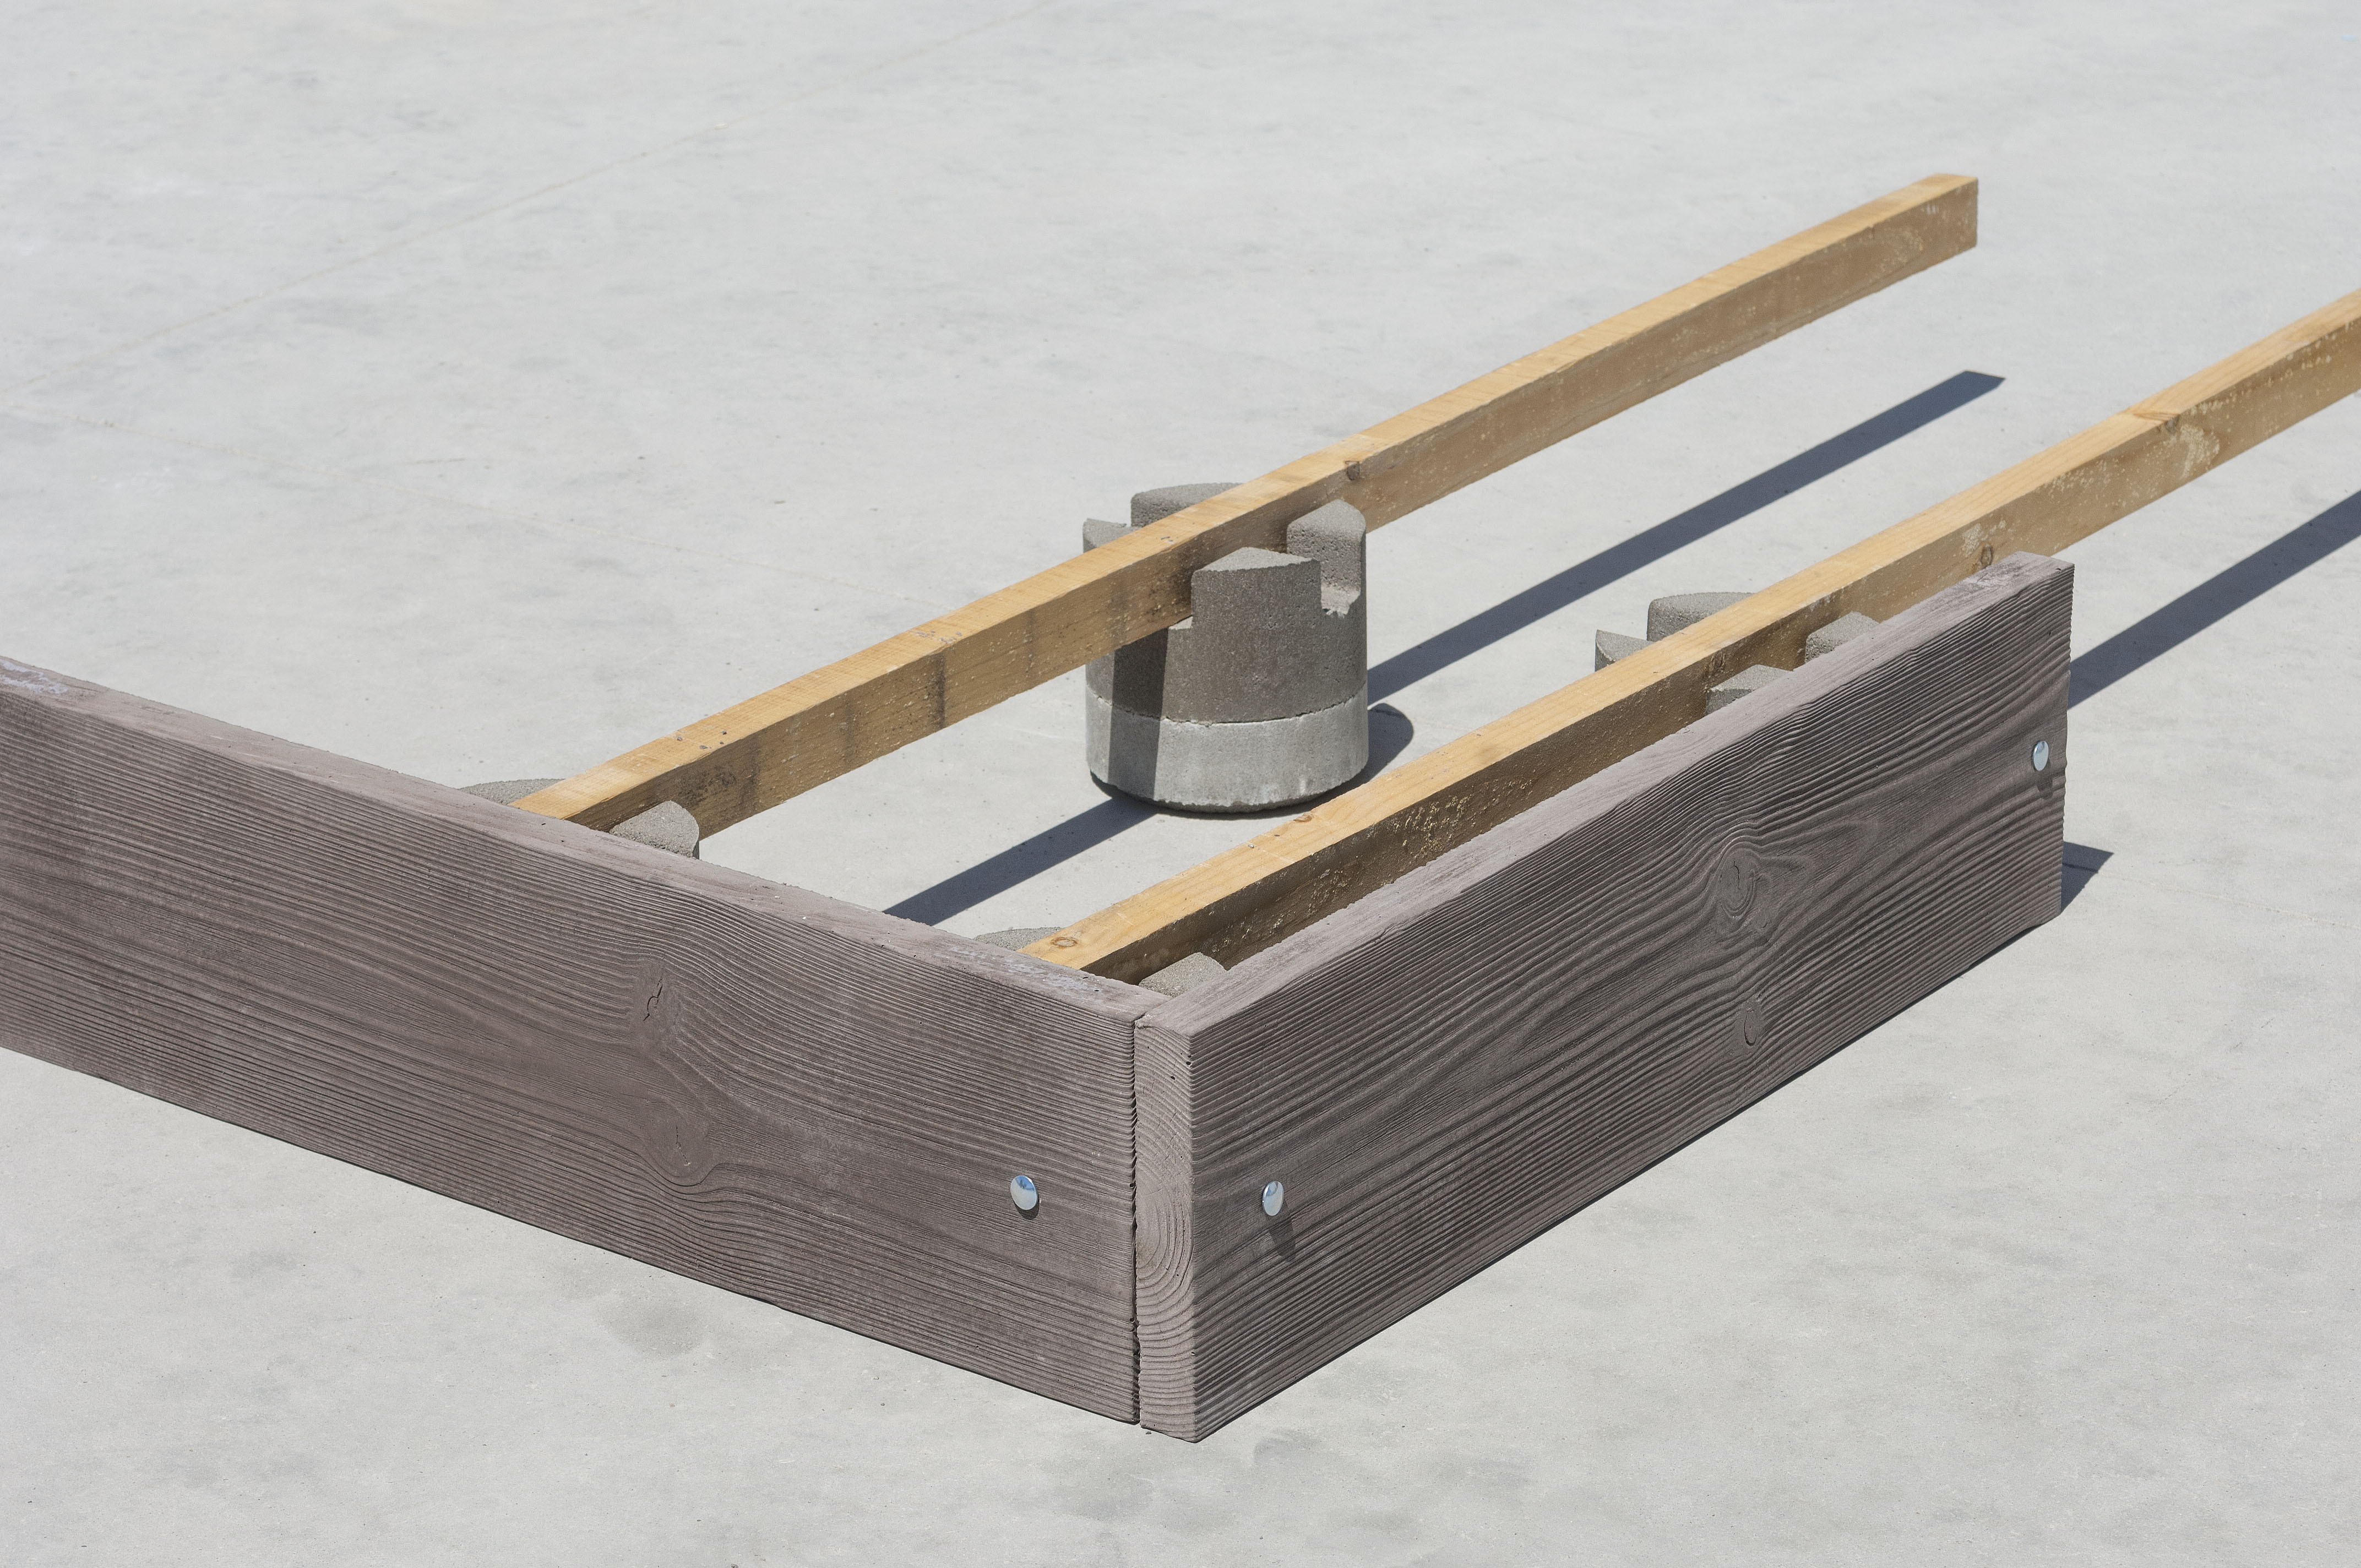 Concrete Supports for Outdoor Floorboards